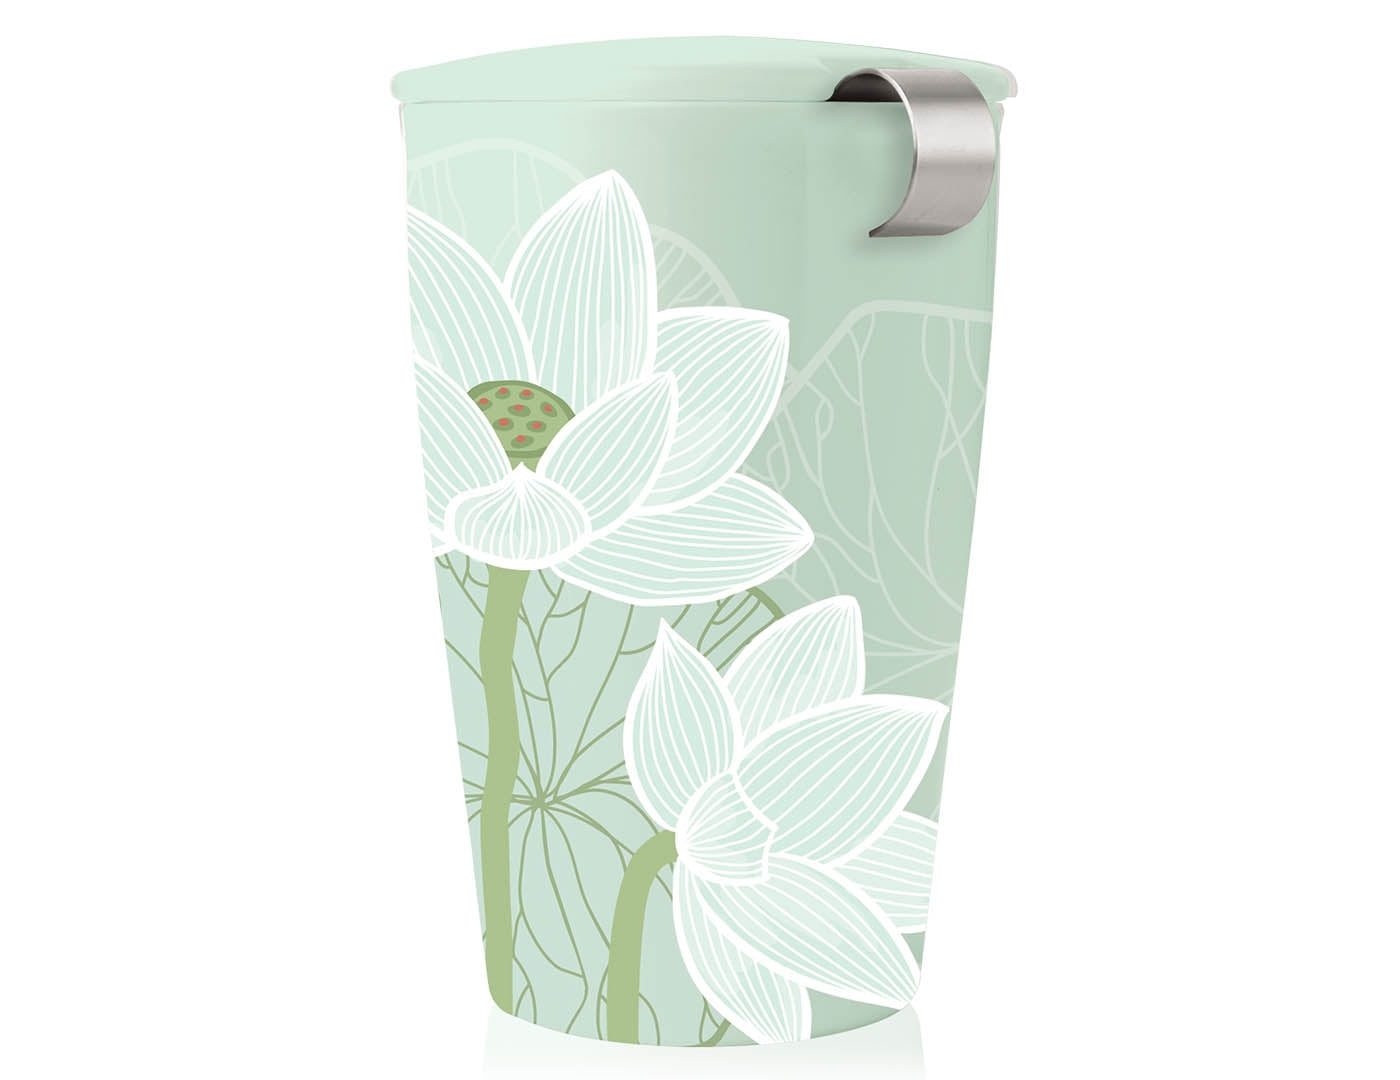 Lotus design KATI® Steeping cup with infuser showing closeup of cup